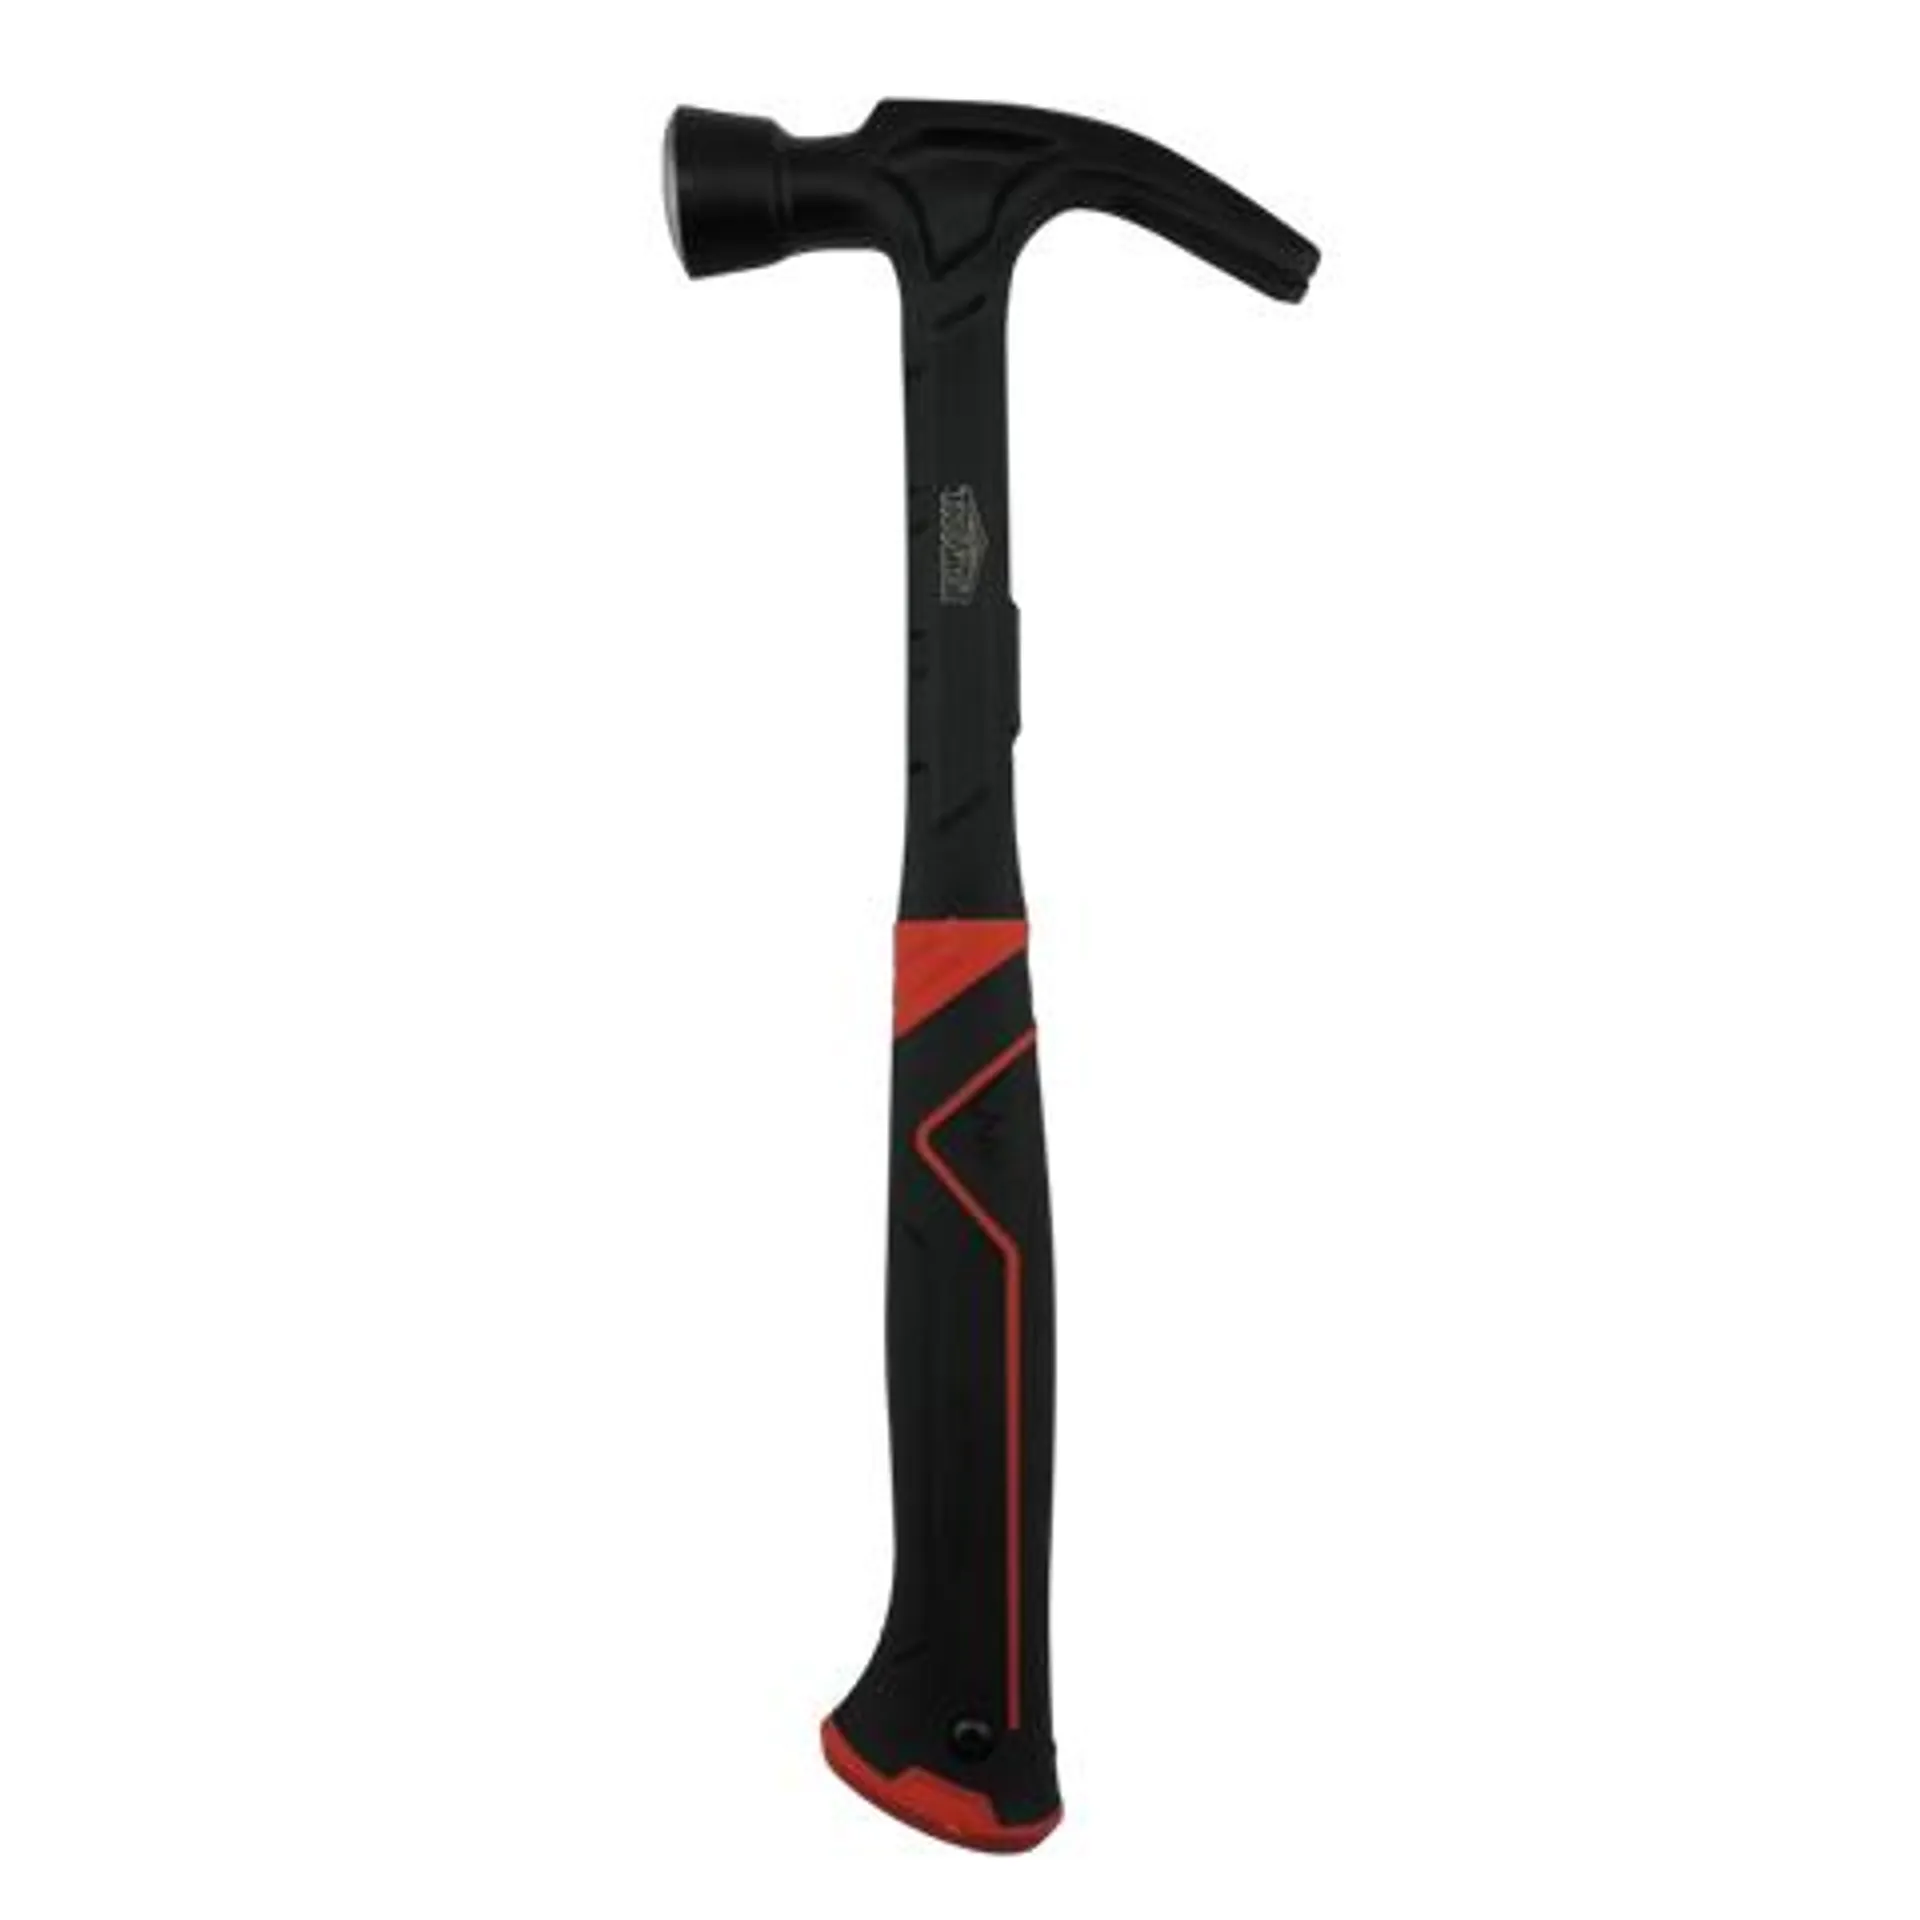 ToolShed Anti-Vibration Claw Hammer 20oz